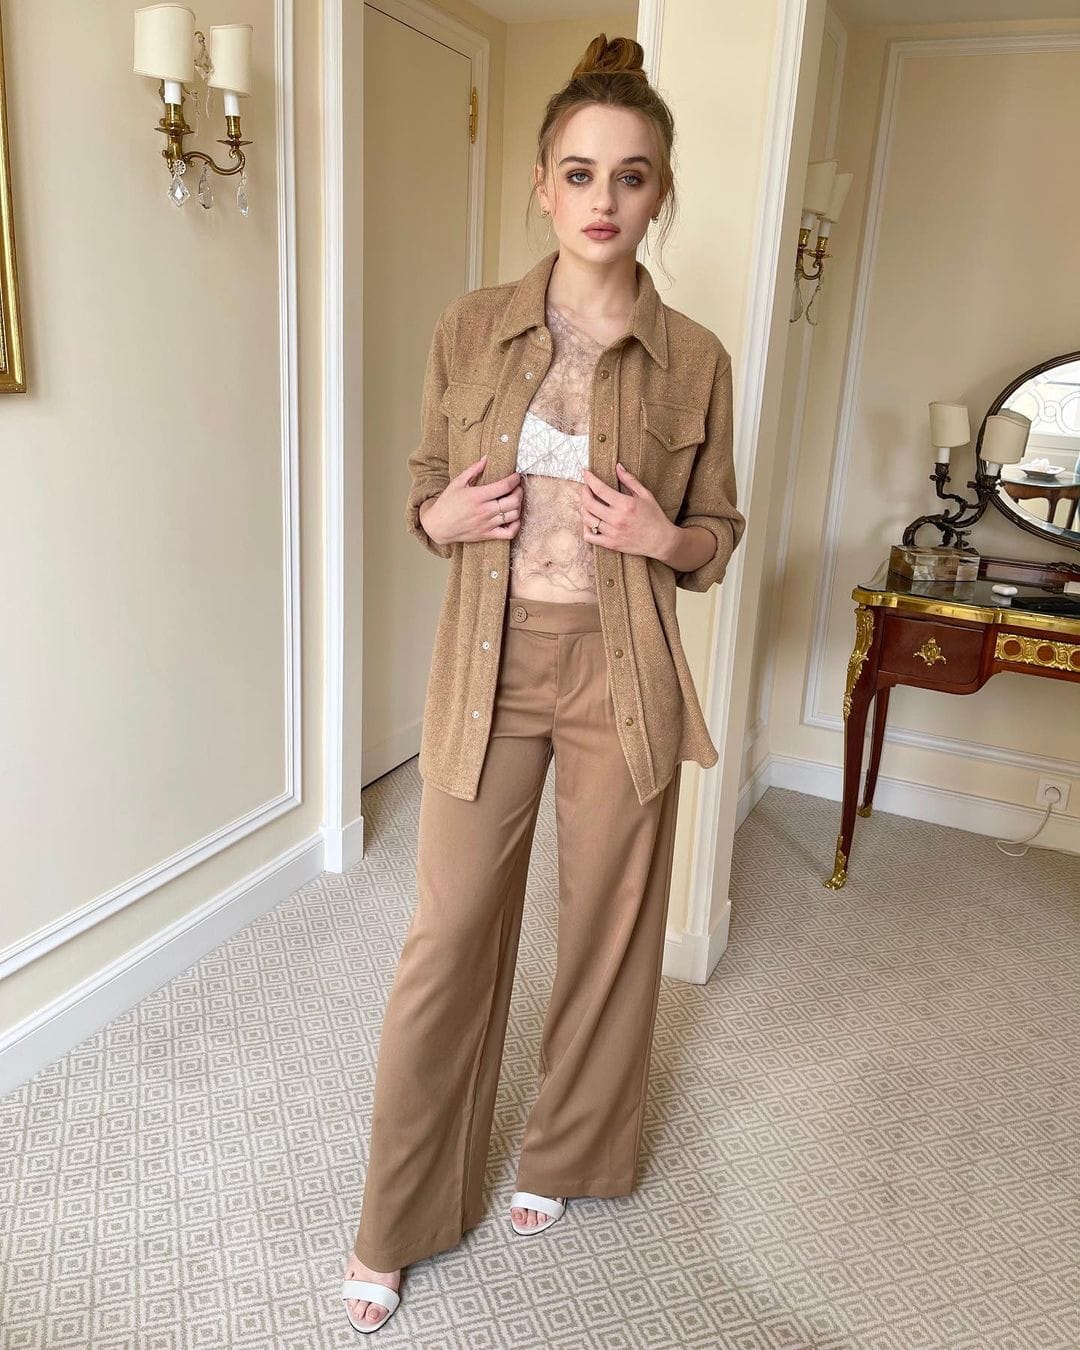 Joey King switching it up from her all-black aesthetic to a soft caramel-toned outfit for a Paris press junket